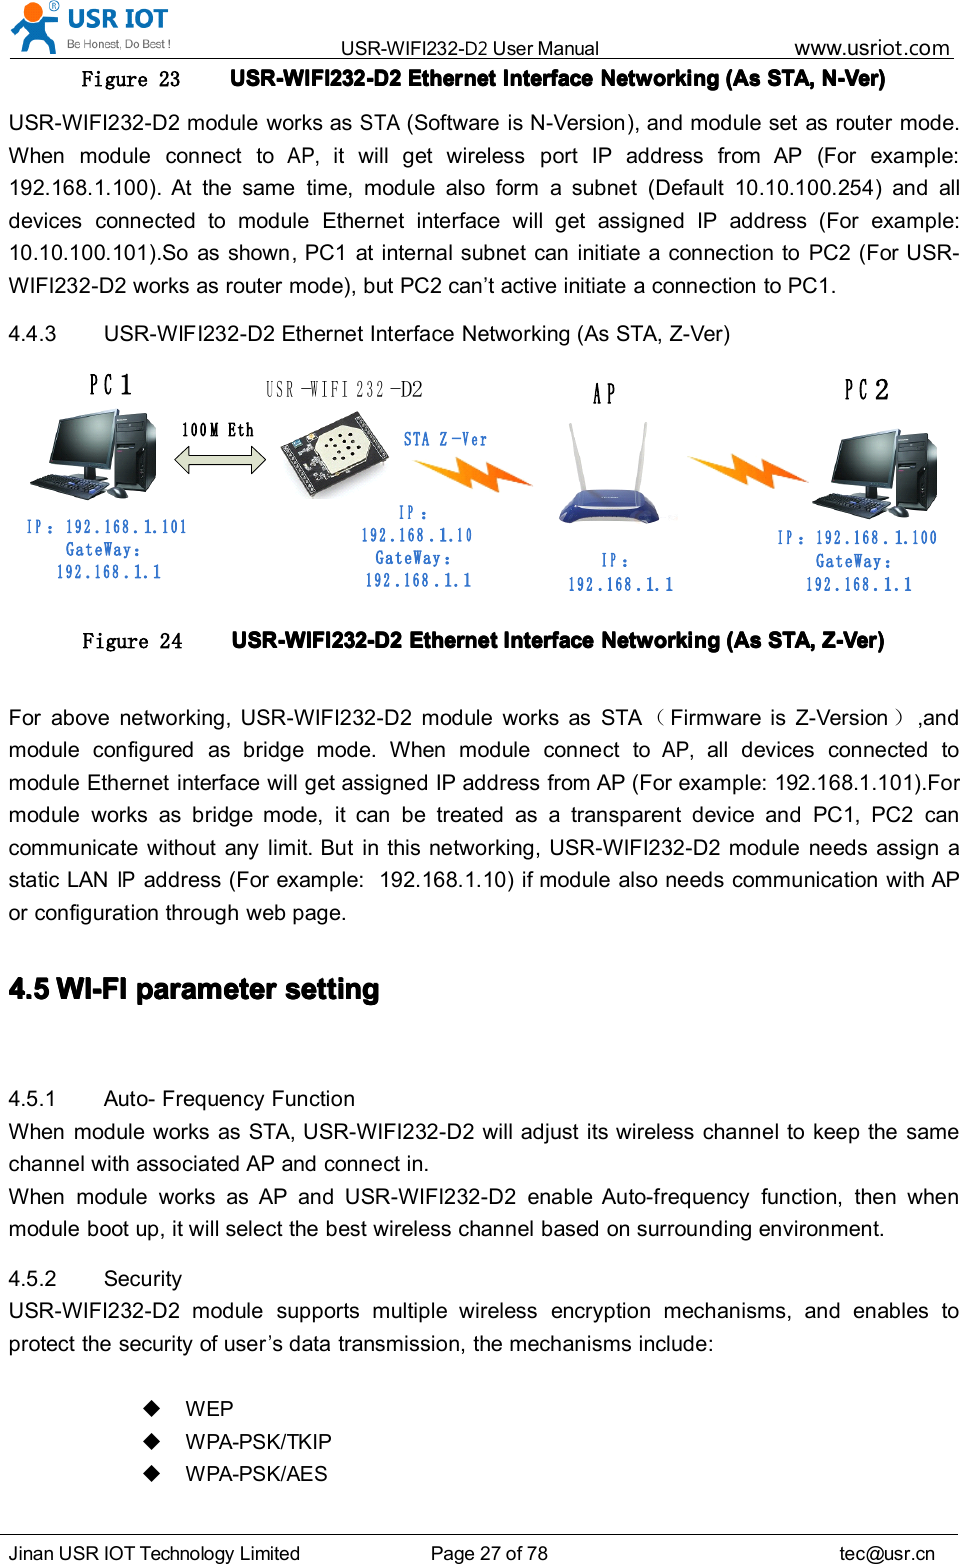 USR-WIFI232- D2 User Manual www.usr iot .comJinan USR IOT Technology Limited Page 27 of 78 tec@usr.cnFigure 23 USR-WIFI232-D2USR-WIFI232-D2USR-WIFI232-D2USR-WIFI232-D2 EthernetEthernetEthernetEthernet InterfaceInterfaceInterfaceInterface NetworkingNetworkingNetworkingNetworking (As(As(As(As STASTASTASTA ,,,, N-VerN-VerN-VerN-Ver ))))USR-WIFI232-D2 module works asSTA(Software is N-Version ), and module set as router mode.When module connect toAP,it will get wireless port IP address from AP ( For example:192.168.1.100 ) . At the same time, module also form a subnet ( Default 10.10.100.254 ) and alldevices connected to module Ethernet interface will get assigned IP address ( For example:10.10.100.101 ) .So as shown , PC1 at internal subnet can initiate a connection to PC2 (For USR-WIFI232-D2 works as router mode), but PC2 can ’ t active initiate a connection to PC1.4.4.3 USR-WIFI232-D2 Ethernet Interface Networking (As STA, Z-Ver)PC1USR-WIFI232-D2APPC2IP：192.168. 1 .101GateWay：192.168. 1 . 1IP：192.168. 1 .10GateWay：192.168. 1 . 1IP：192.168. 1 . 1IP：192.168. 1 .100GateWay：192.168. 1 . 1100M EthSTA Z-VerFigure 24 USR-WIFI232-D2USR-WIFI232-D2USR-WIFI232-D2USR-WIFI232-D2 EthernetEthernetEthernetEthernet InterfaceInterfaceInterfaceInterface NetworkingNetworkingNetworkingNetworking (As(As(As(As STASTASTASTA ,,,, Z-VerZ-VerZ-VerZ-Ver ))))For above networking, USR-WIFI232-D2 module works as STA （Firmware is Z-Version ）,andmodule configured as bridge mode. When module connect toAP,all devices connected tomodule Ethernet interface will get assigned IP address from AP (For example: 192.168.1.101).Formodule works as bridge mode, it can be treated as a transparent device and PC1, PC2 cancommunicate without any limit. But in this networking, USR-WIFI232-D2 module needs assign astatic LANIPaddress (For example: 192.168.1.10) if module also needs communication with APor configuration through web page.4.54.54.54.5 WI-FIWI-FIWI-FIWI-FI parameterparameterparameterparameter settingsettingsettingsetting4.5.1 Auto- Frequency FunctionWhen module works as STA, USR-WIFI232-D2 will adjust its wireless channel to keep the samechannel with associated AP and connect in.When module works as AP and USR-WIFI232-D2 enable Auto-frequency function, then whenmodule boot up, it will select the best wireless channel based on surrounding environment.4.5.2 SecurityUSR-WIFI232-D2 module supports multiple wireless encryption mechanisms, and enables toprotect the security of user’s data transmission, the mechanisms include:WEPWPA-PSK/TKIPWPA-PSK/AES